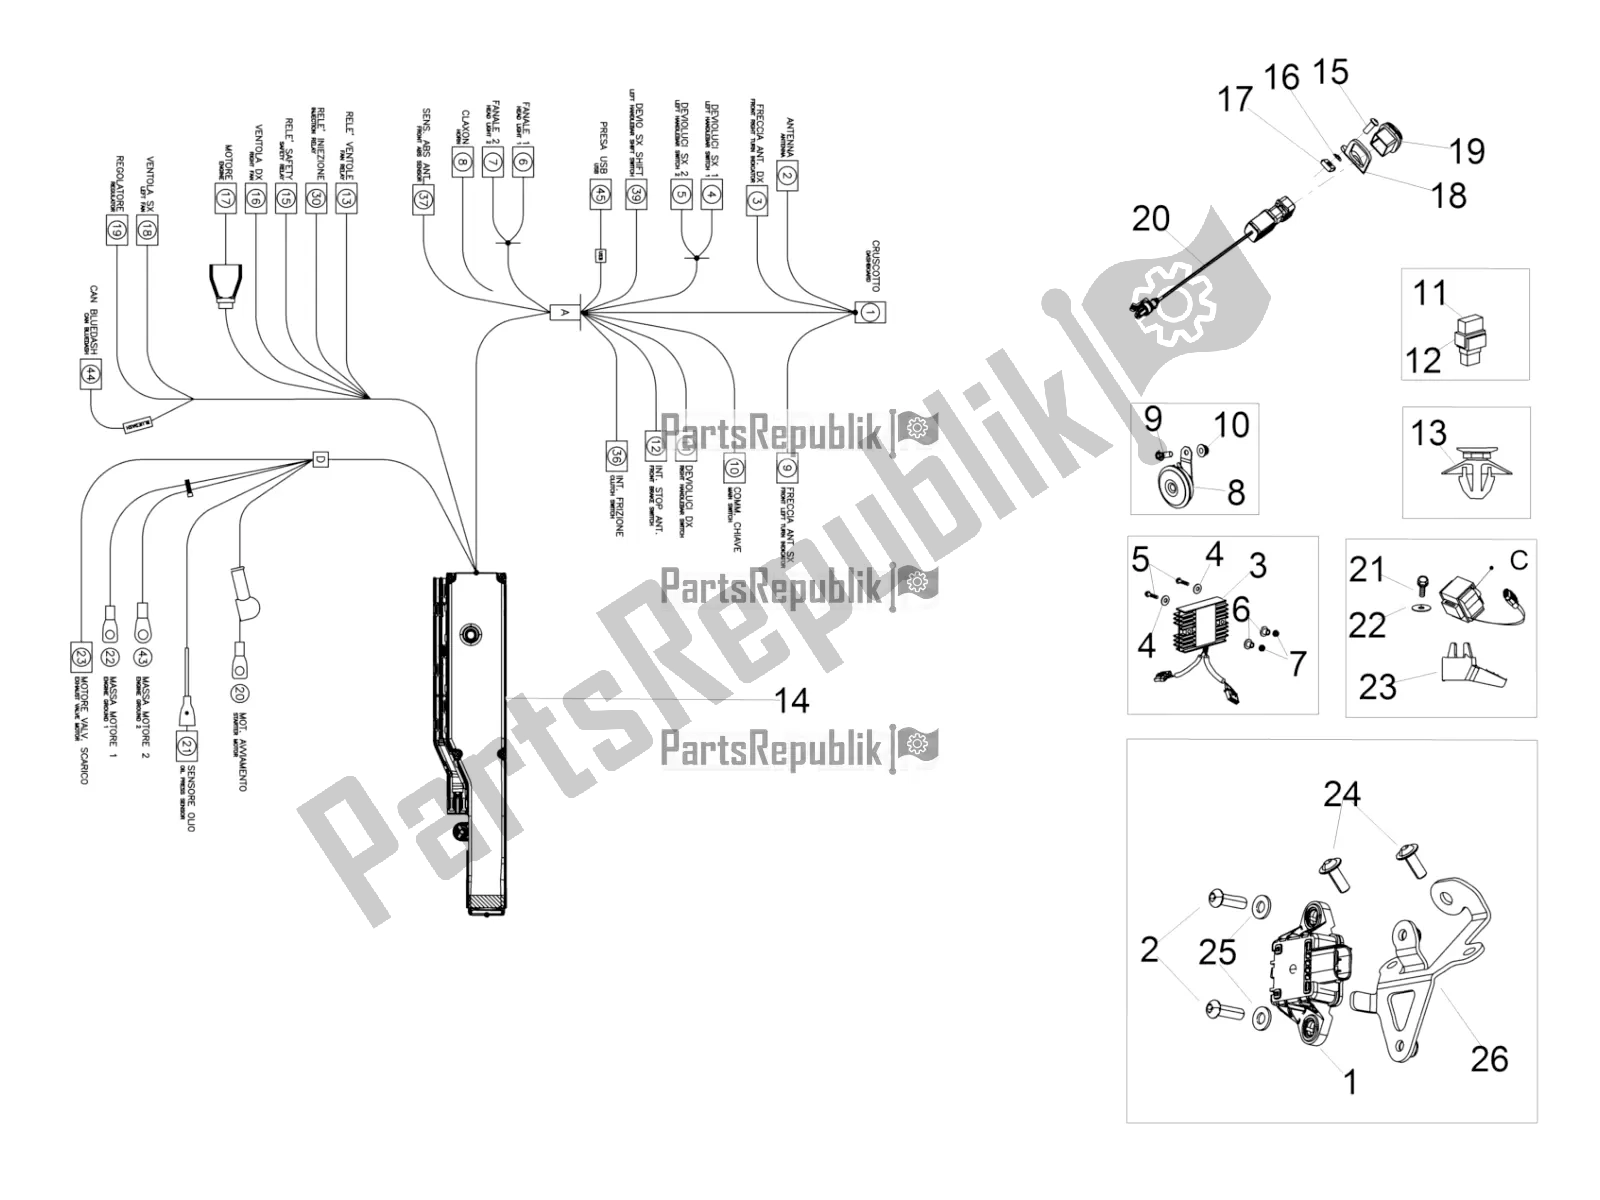 All parts for the Front Electrical System of the Aprilia RSV4 RR ABS 1000 2018